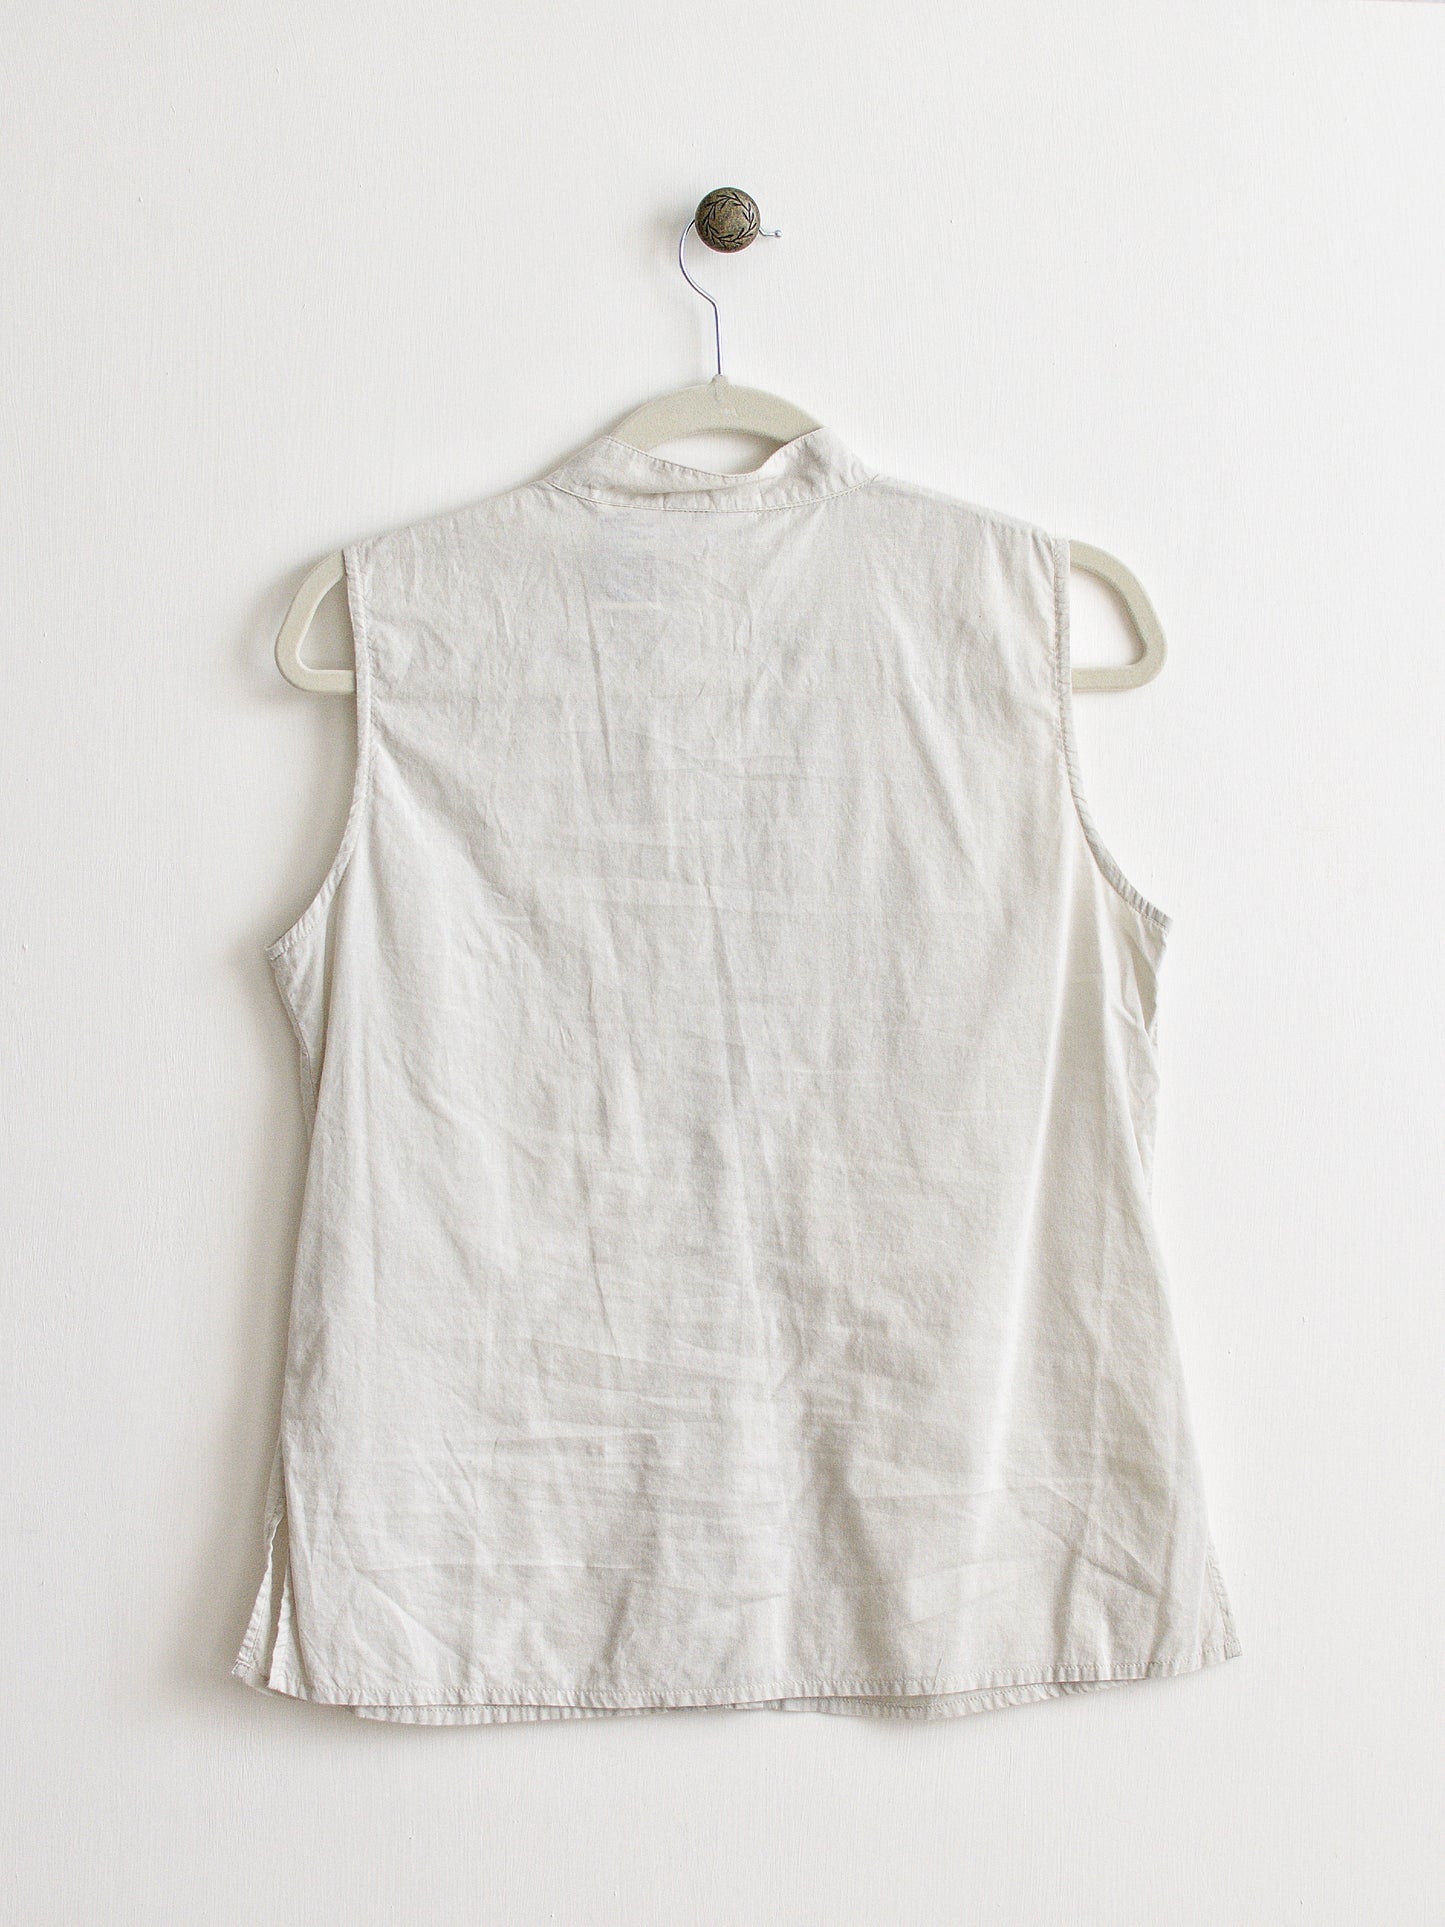 Small Sage White Stag Top